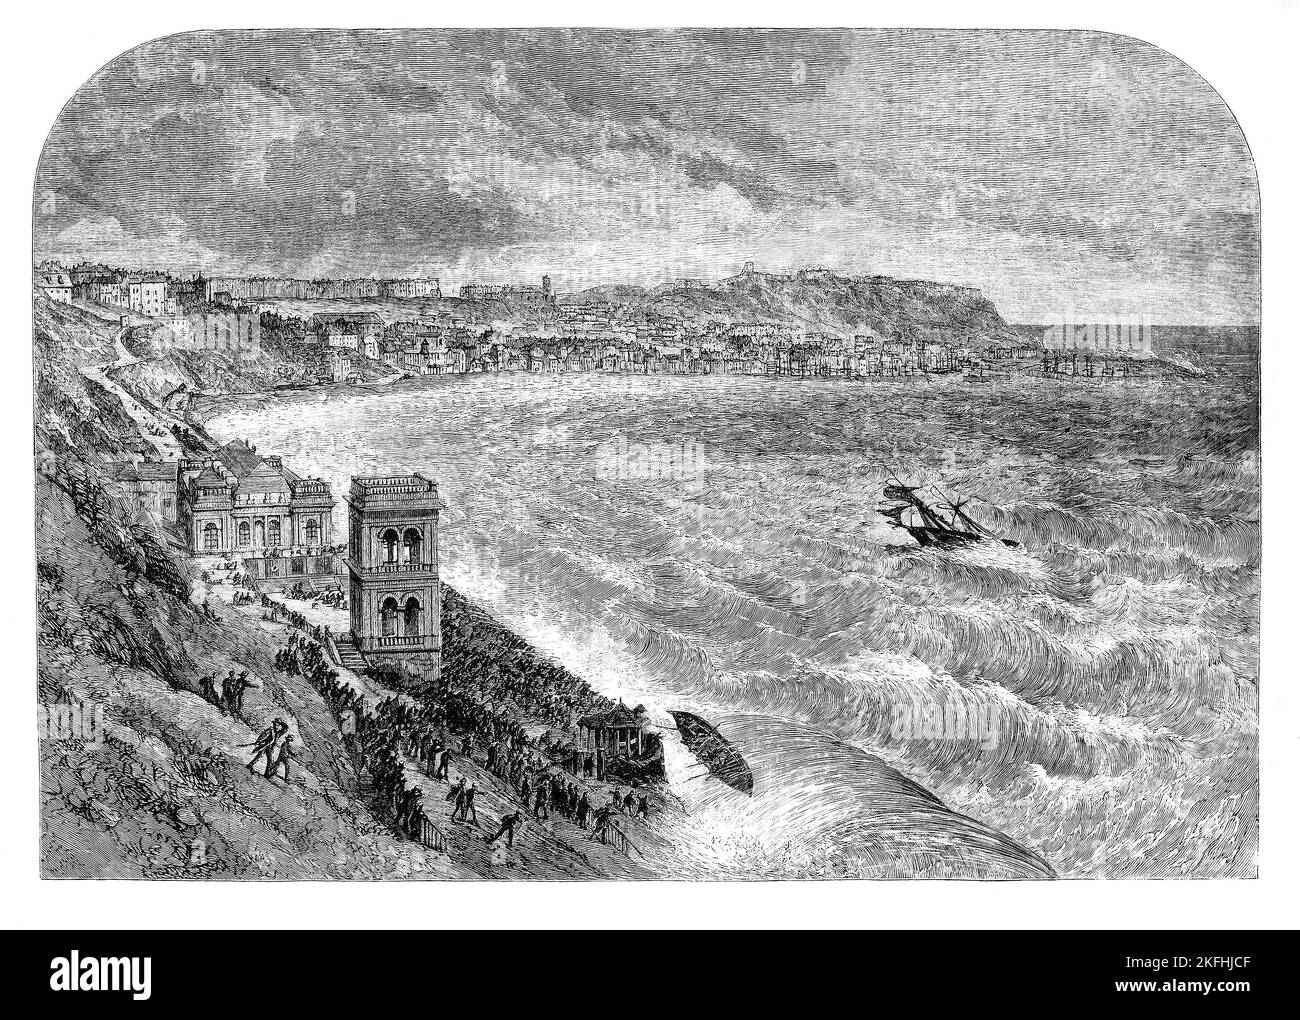 During the massive storm of November 2nd, 1861, 'The Coupland', a schooner from south shields attempted to gain entry to the harbour at Scarborough on the Yorkshire coast, but failed. The Lifeboat was called out watched by many spectators, as it headed for the Spa promenade Walls. The waves were huge and the Lifeboat soon got into difficulties when the heavy sea washed several of the crew overboard. Some of the spectators attempted to help, but a number of them and lifeboatmen died as a result of the storm. Stock Photo